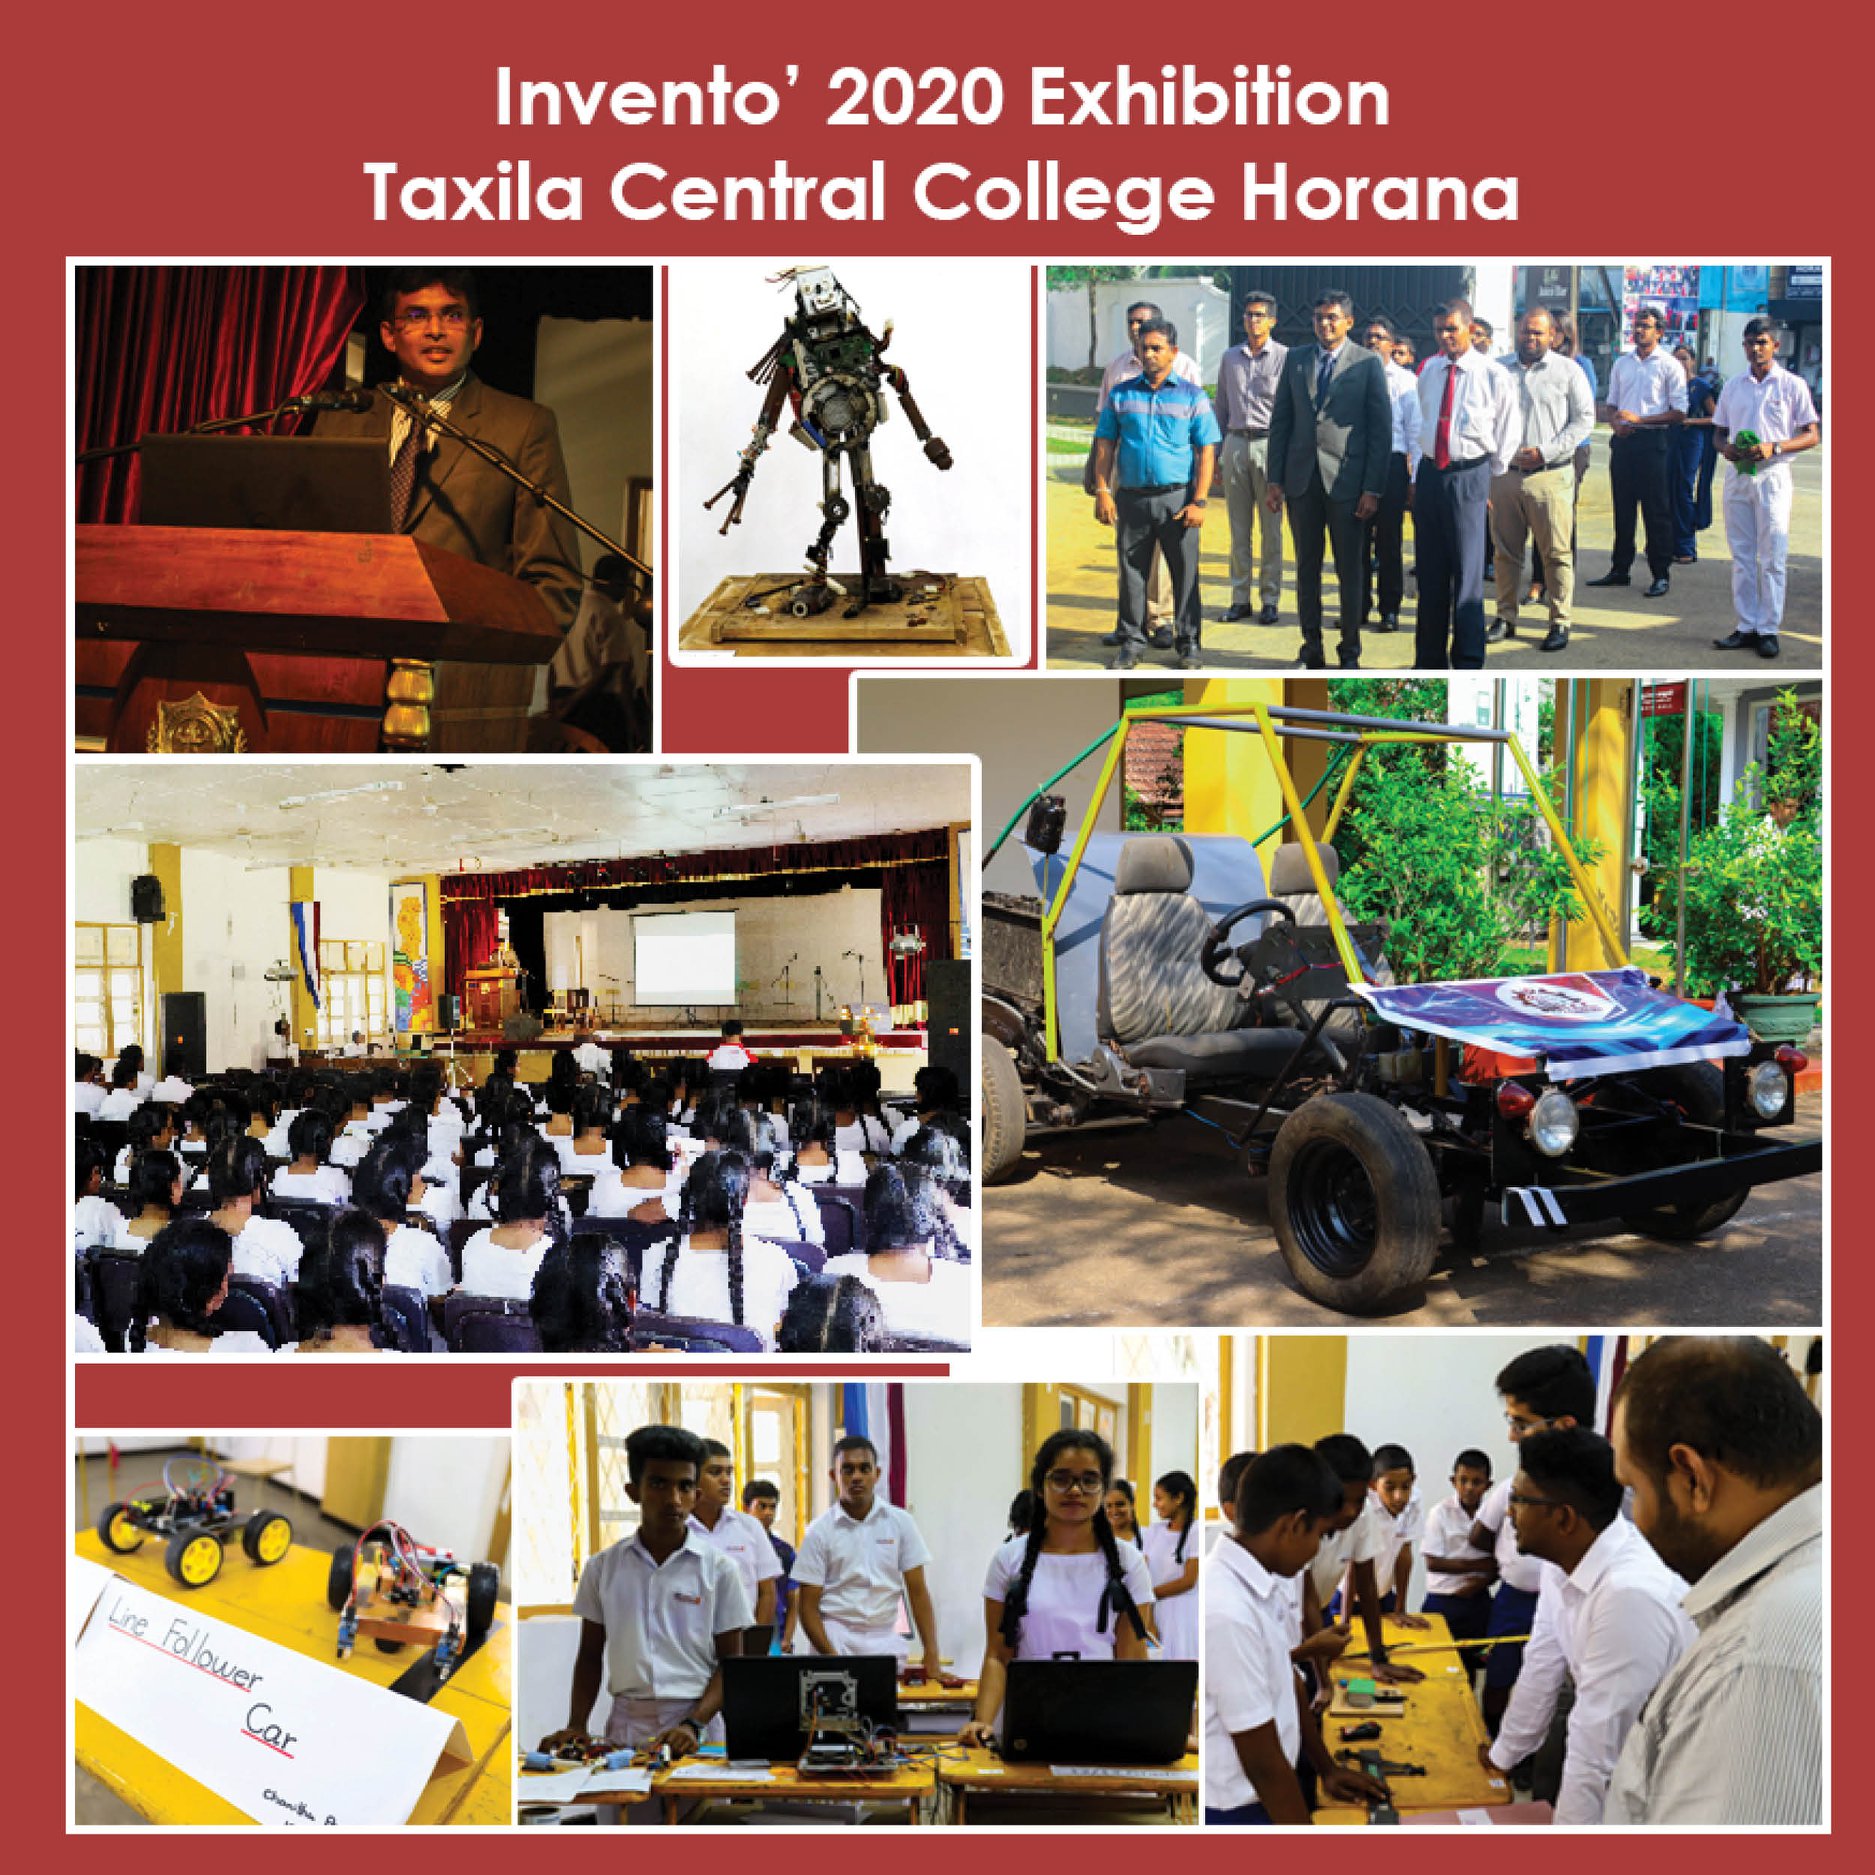 Invento-2020-a-science-innovative-exhibition-organized-by-Taxila-Central-College-Horana-